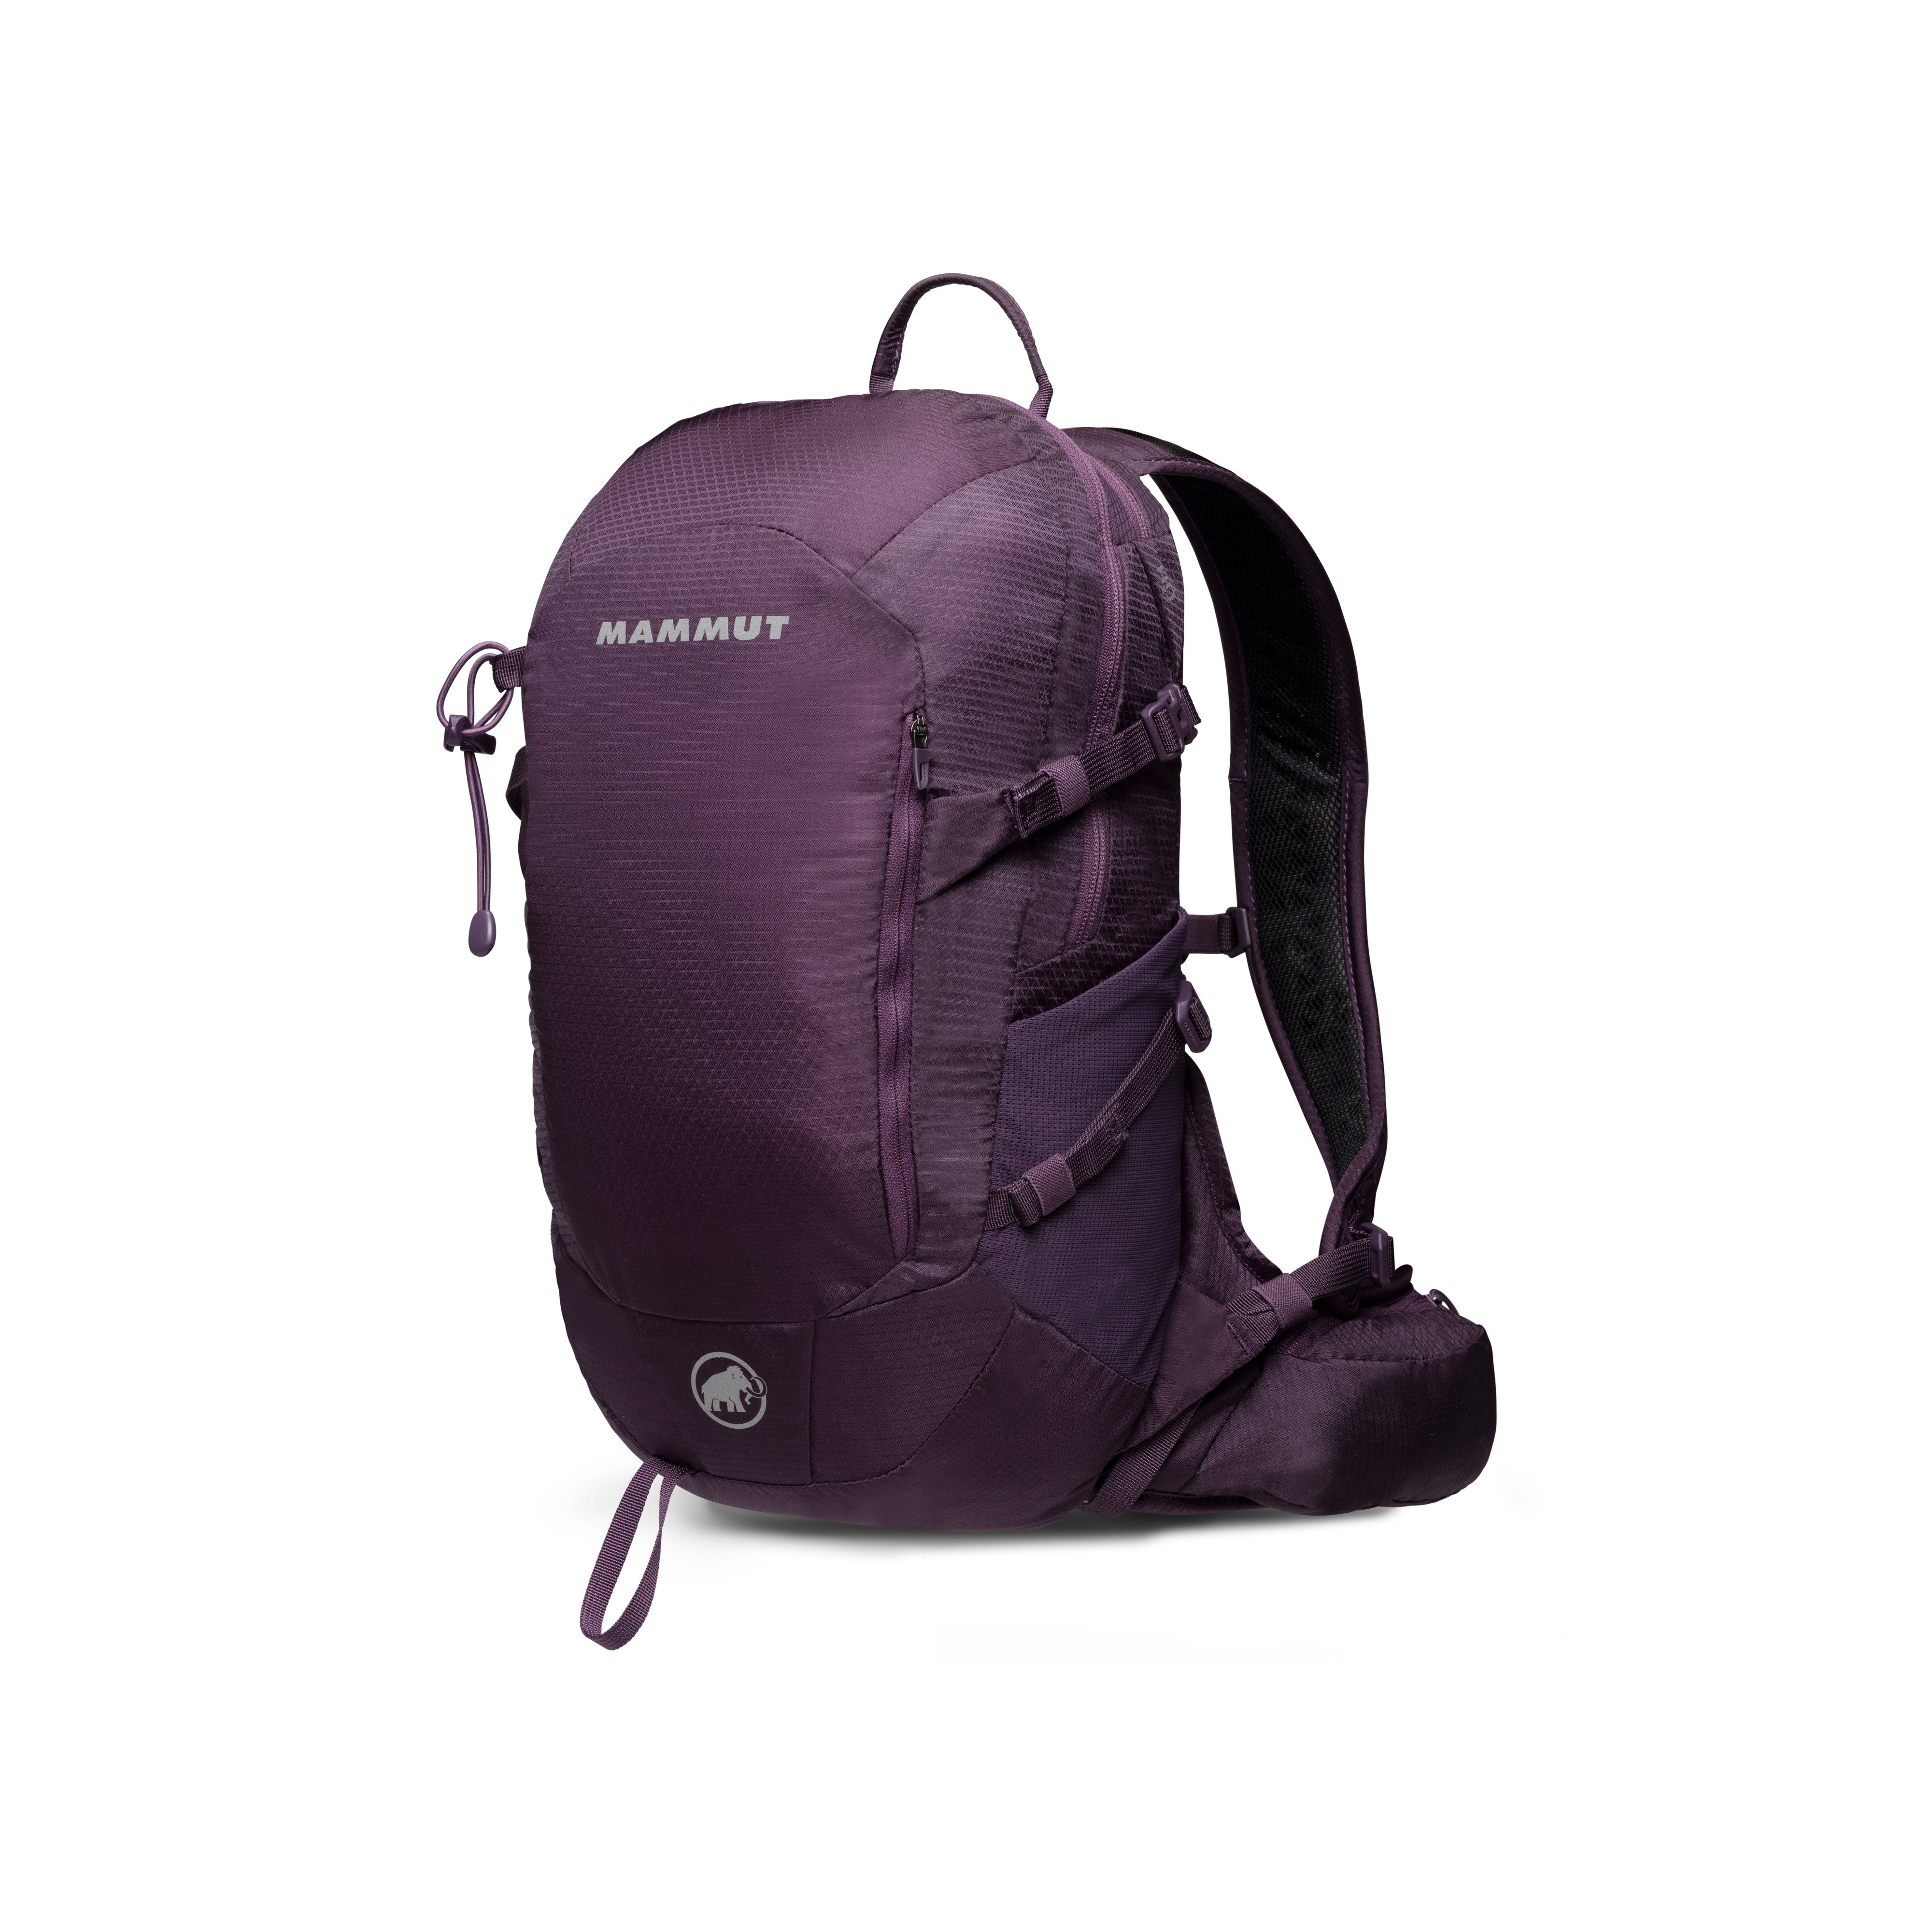 Lithia Speed 15 - galaxy, 15 L product image